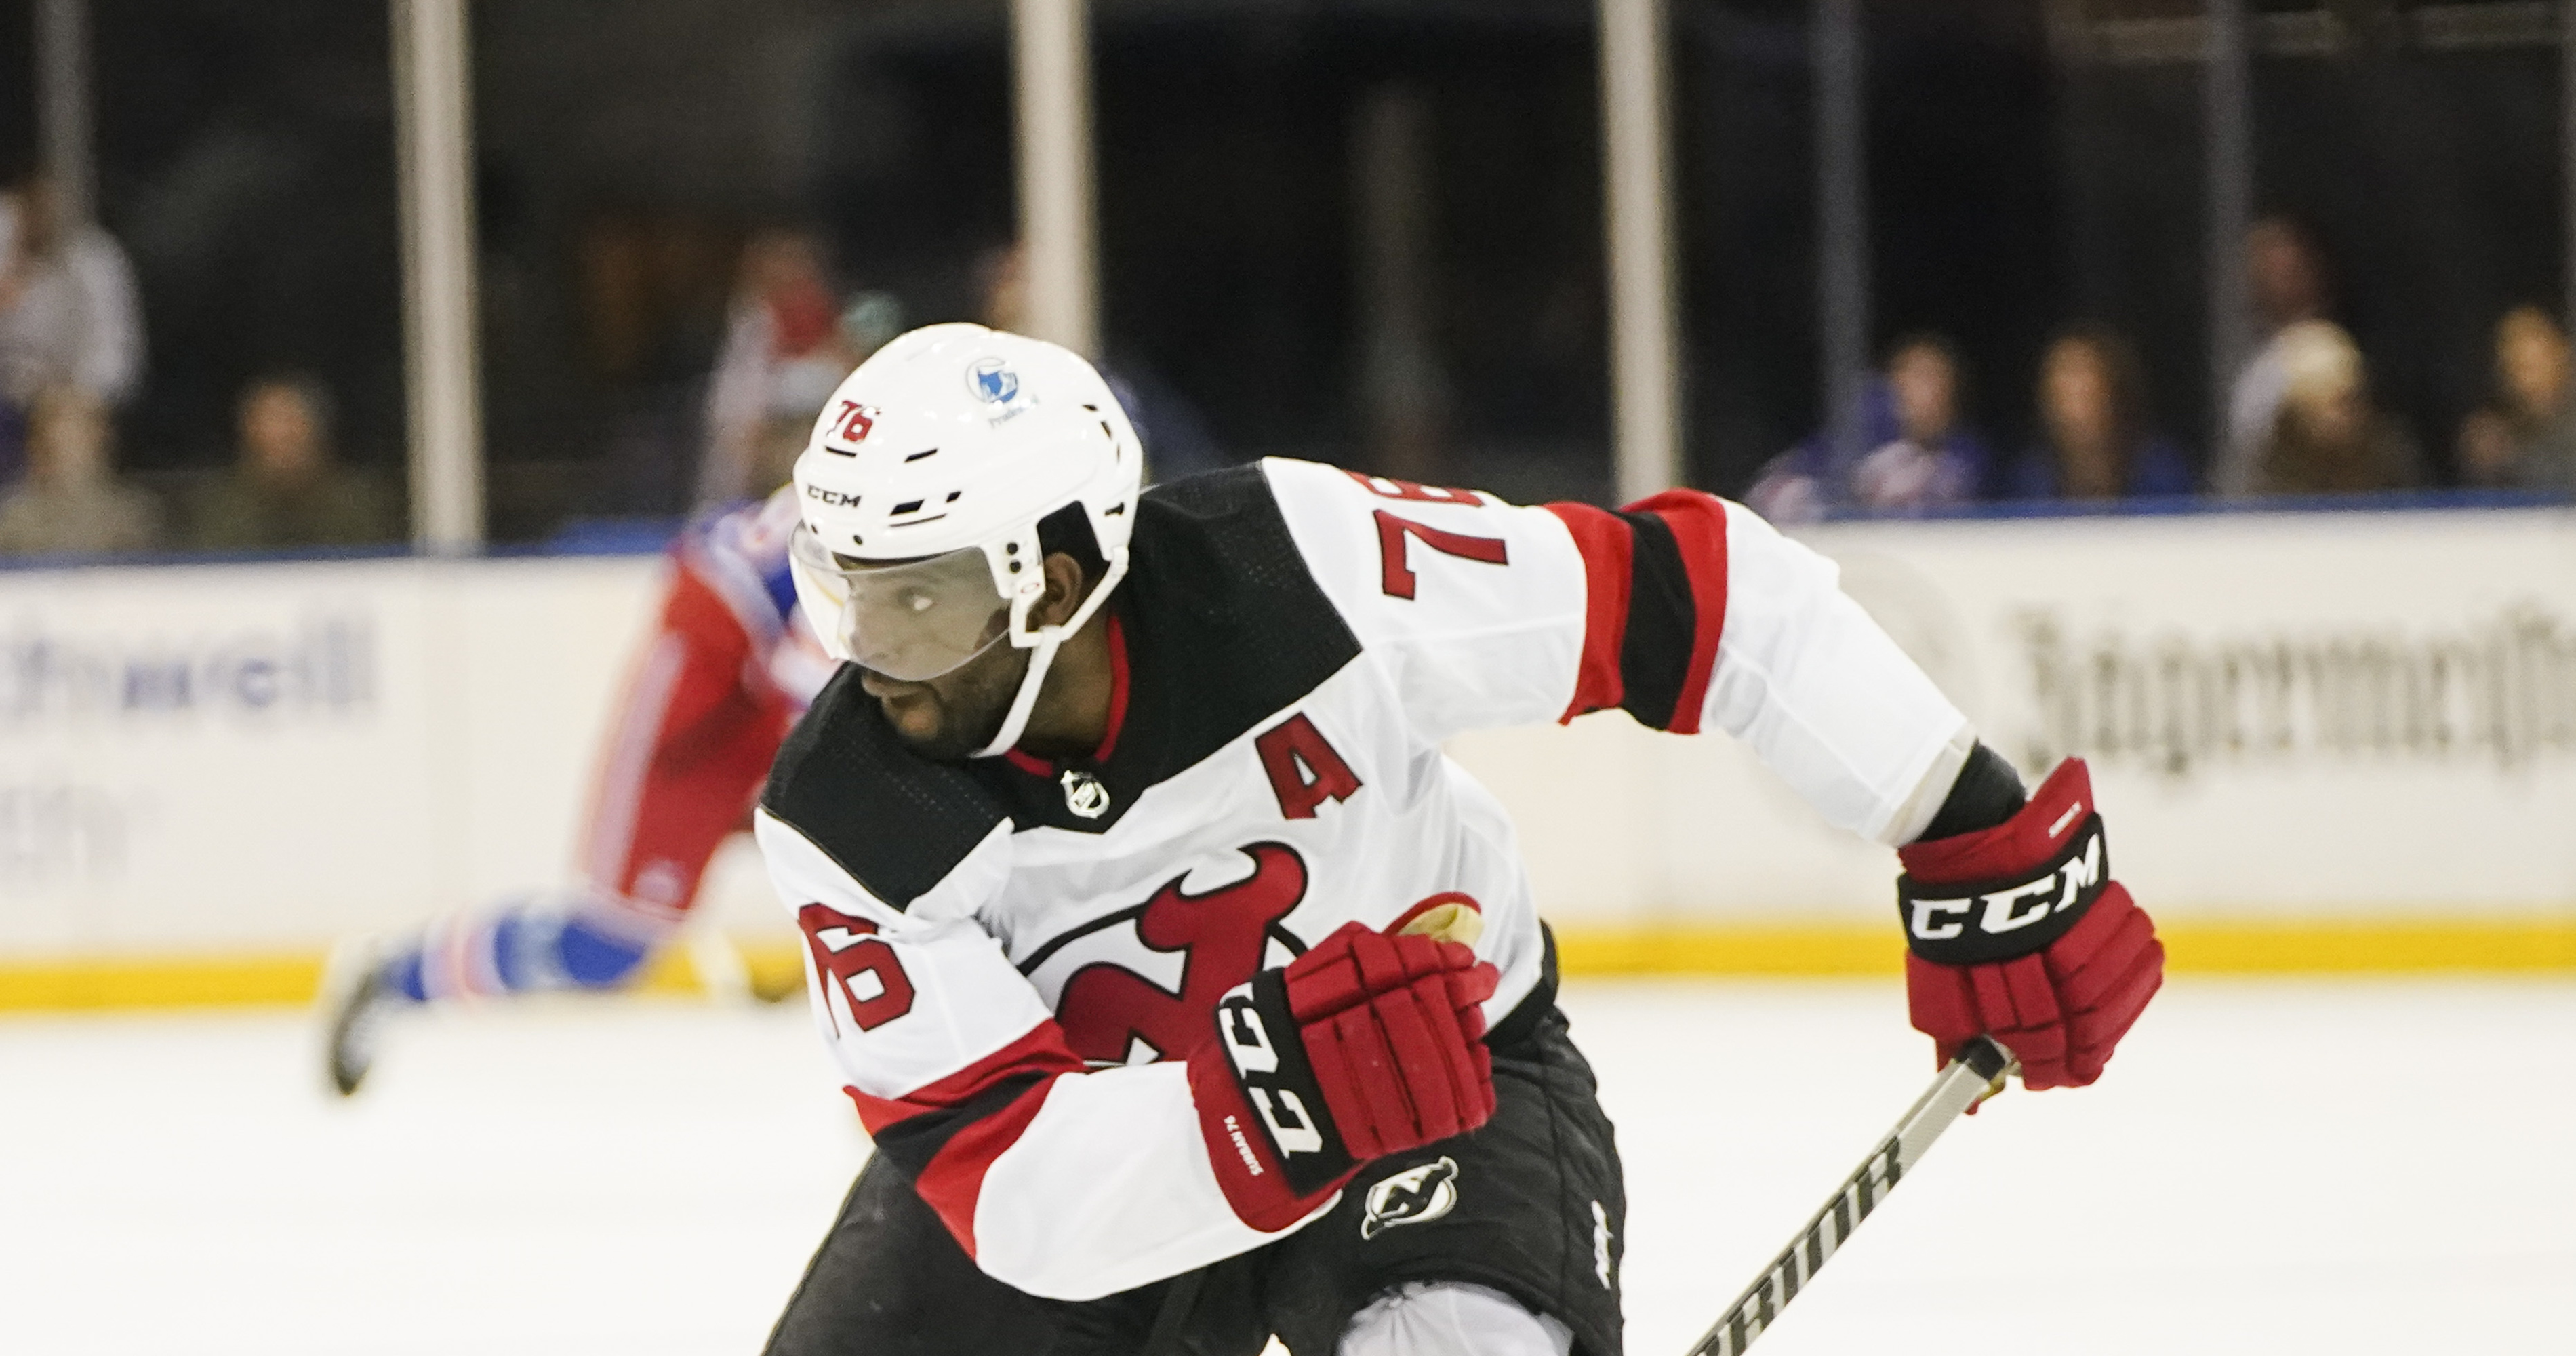 Is PK Subban Retired from NHL? Who is PK Subban? - News